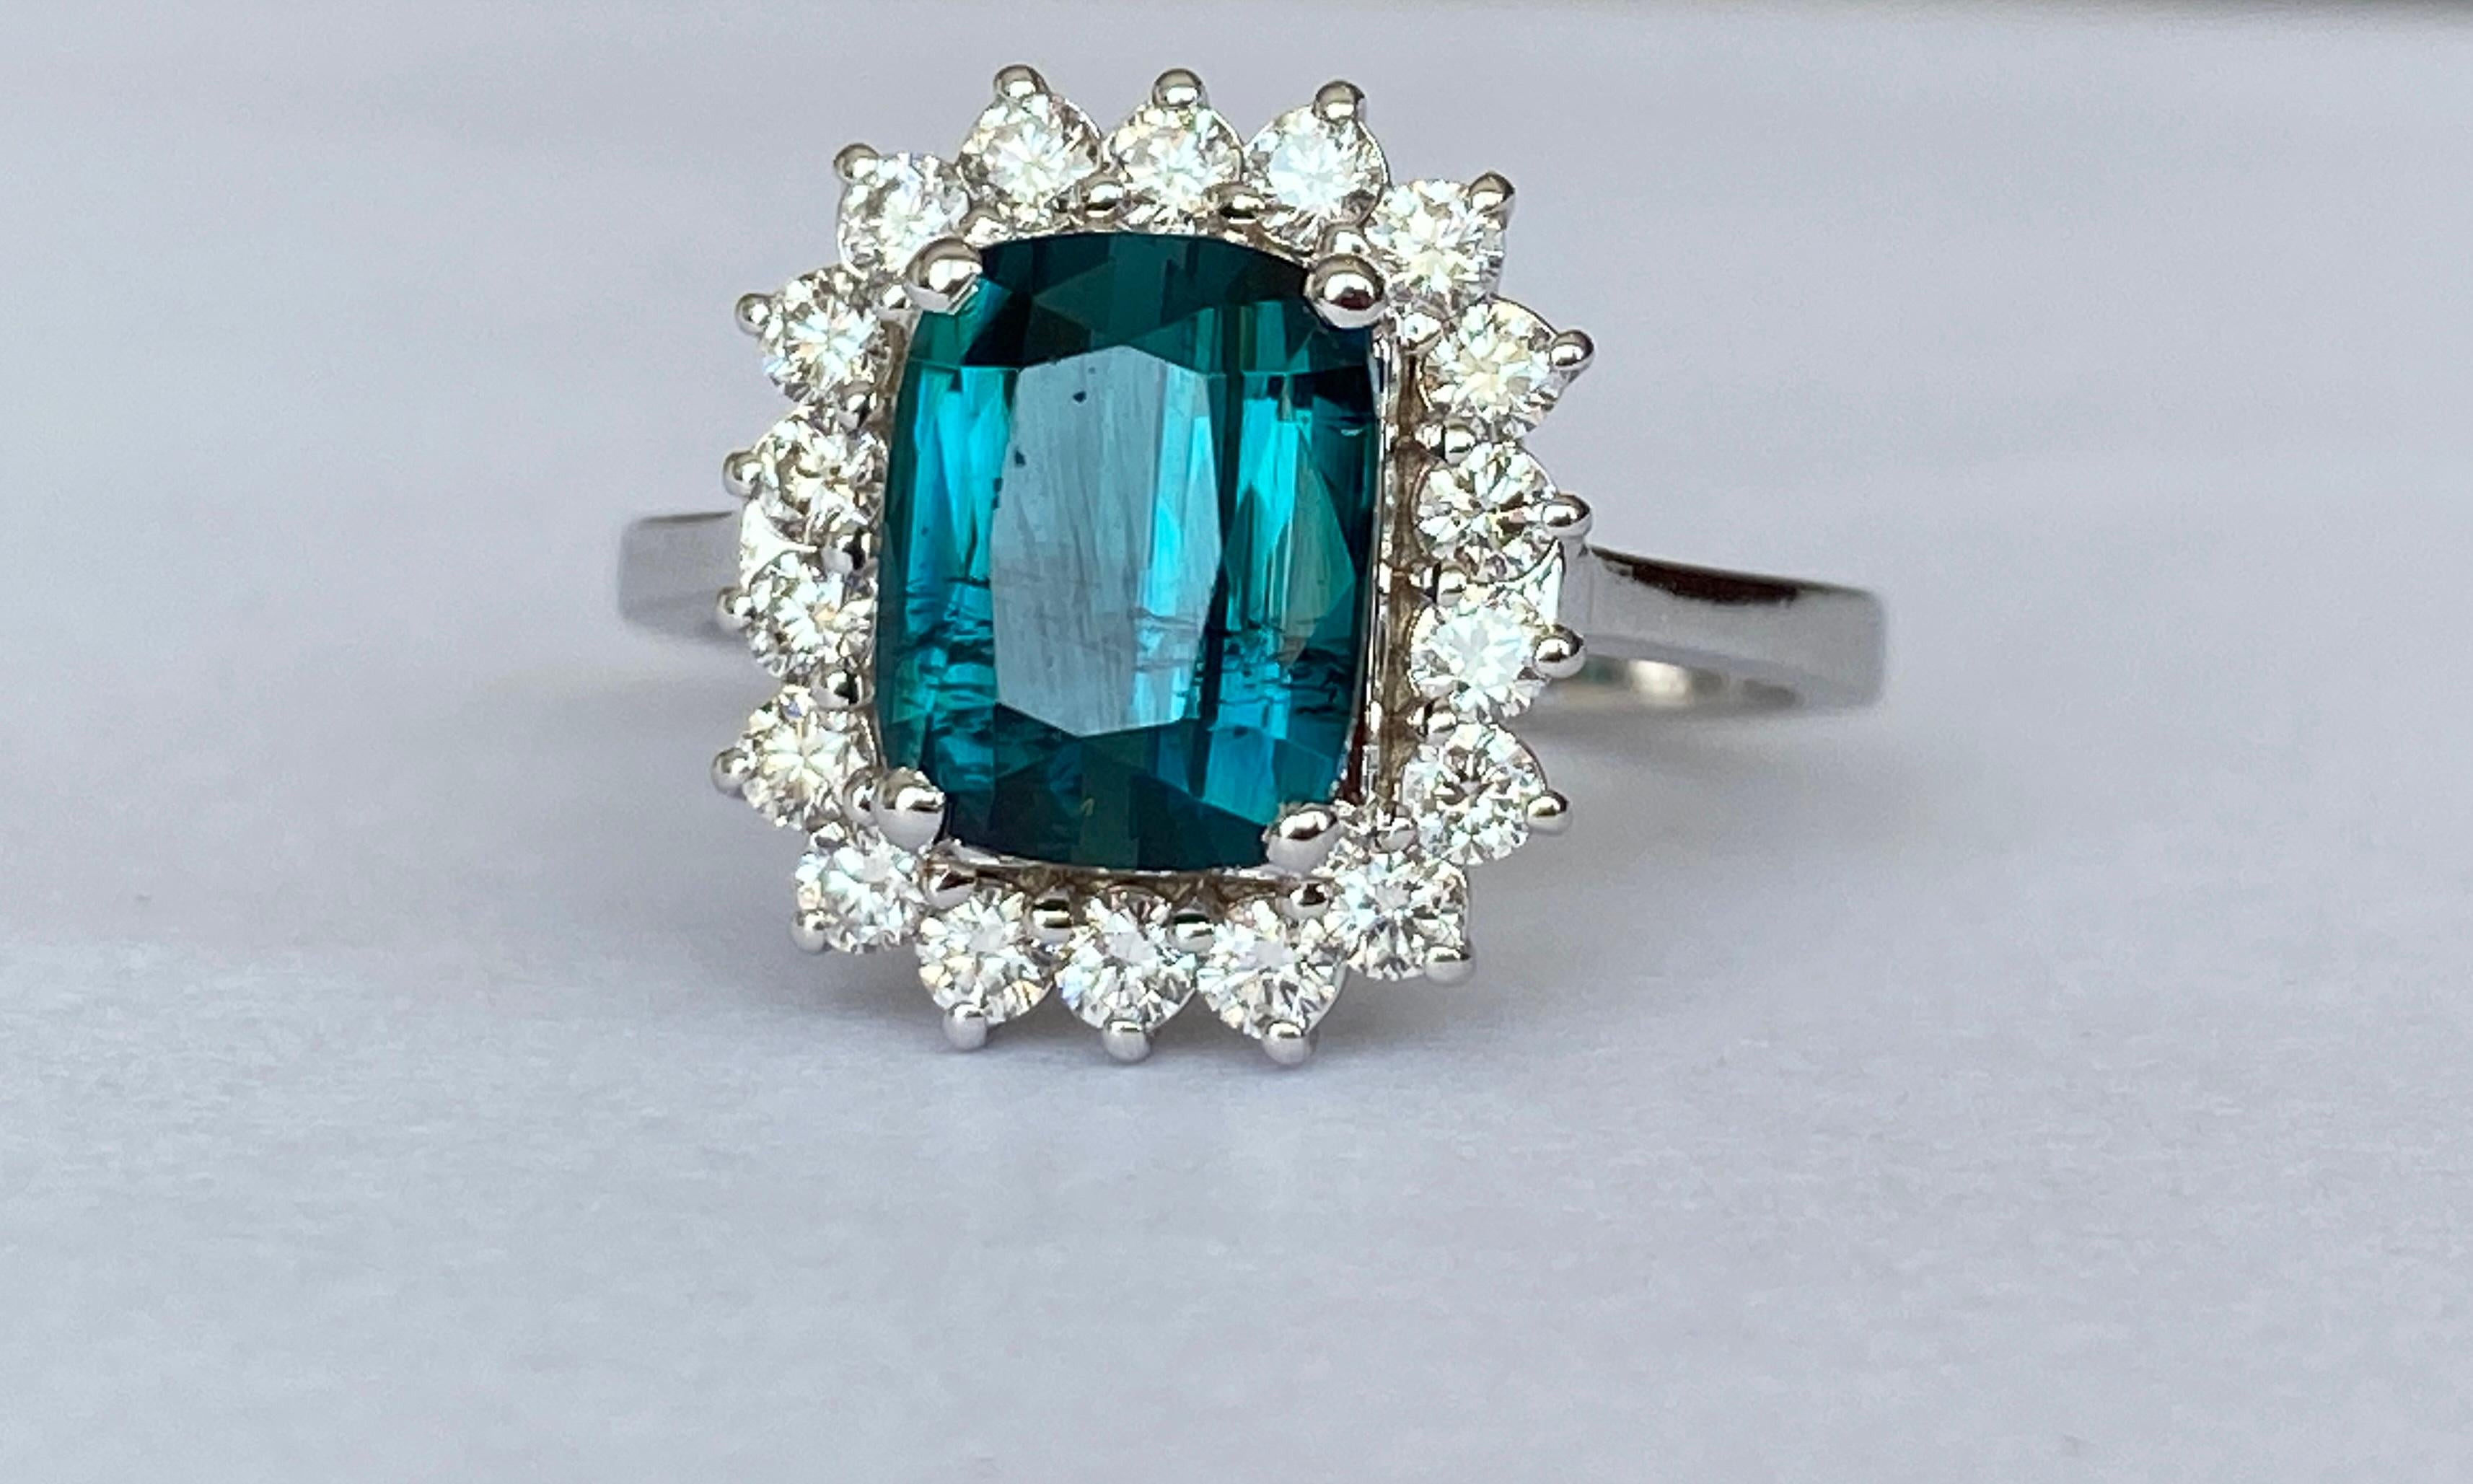 Exclusive handmade ring in 18 kt white gold set with  cushion mixed cut lagoon tourmaline of 2.00 carats and decorated with 18 pieces of brilliant cut diamonds. Total diamonds:0.54 ct E/F/VS. GEM Report Antwerp certificate is included. Number